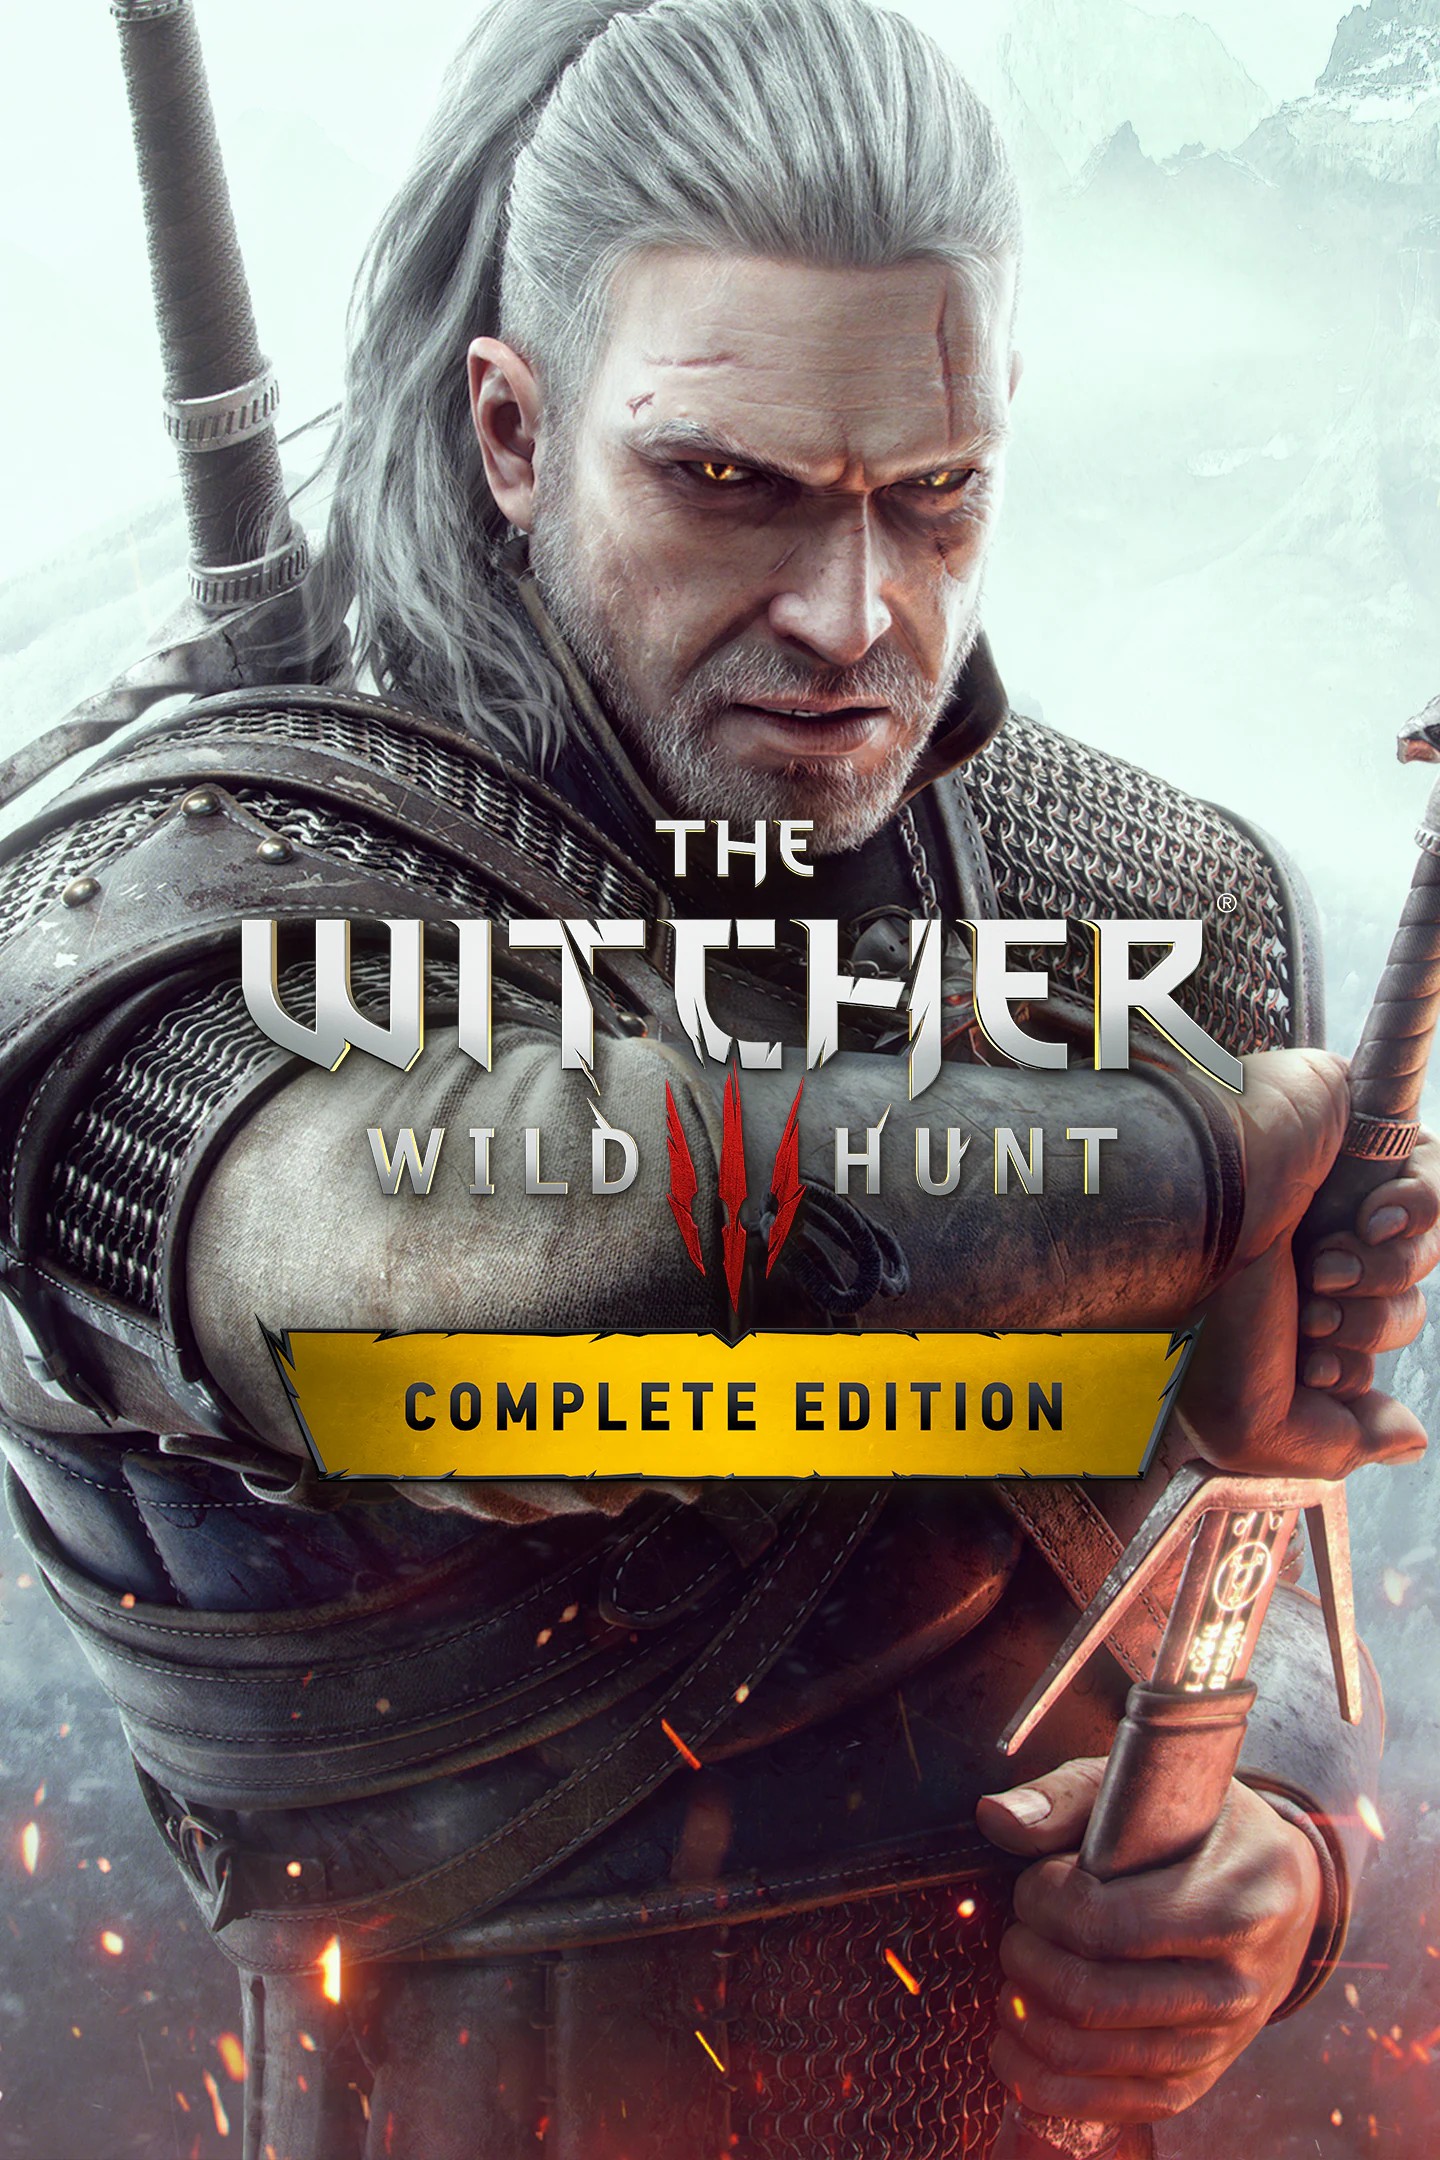 The Witcher Wild 3 Hunt (Complete Edition)